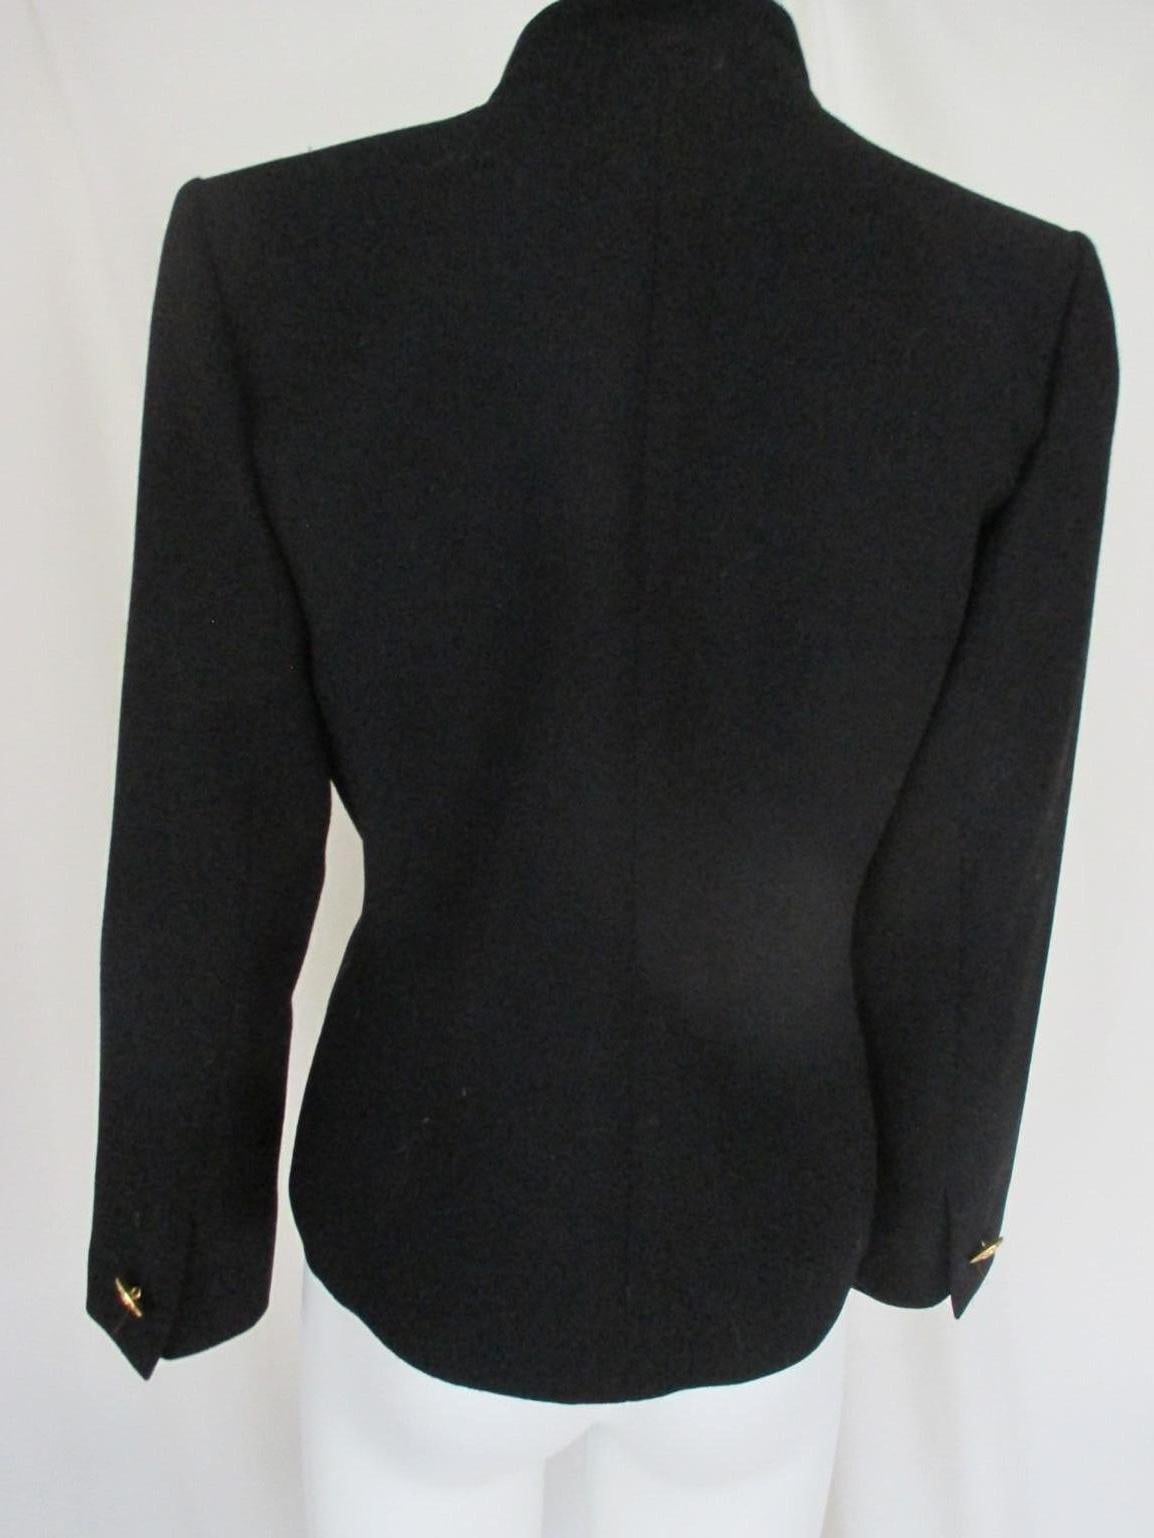 jacket with gold buttons